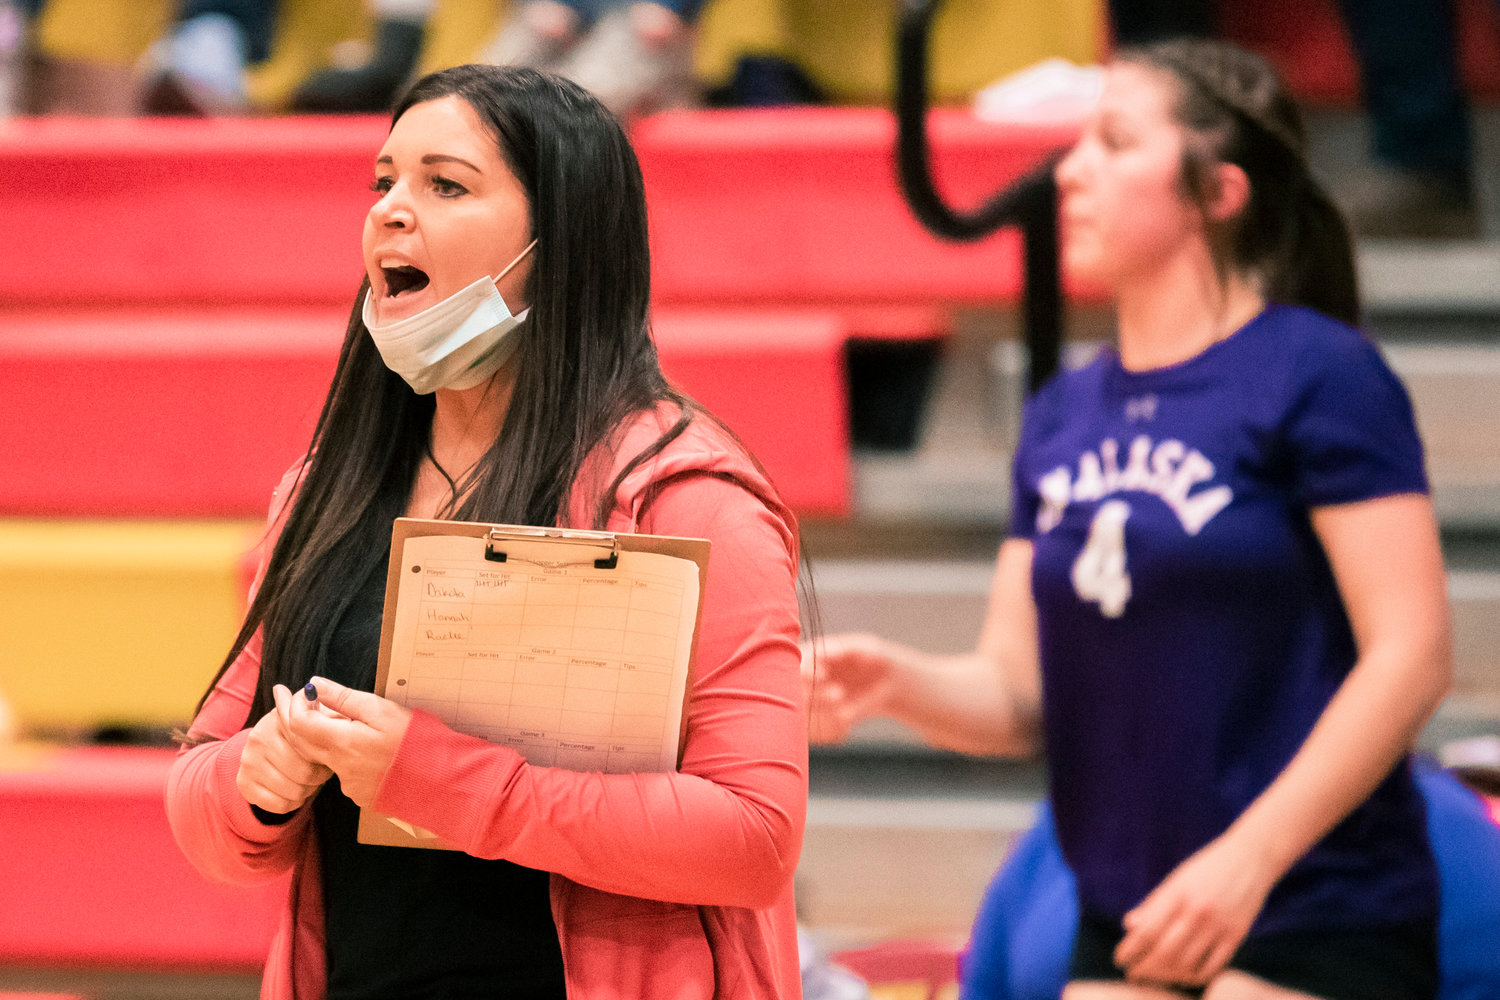 Onalaska’s Head Coach Jennifer Hamilton yells to players on the court during a volleyball game Thursday in Winlock.